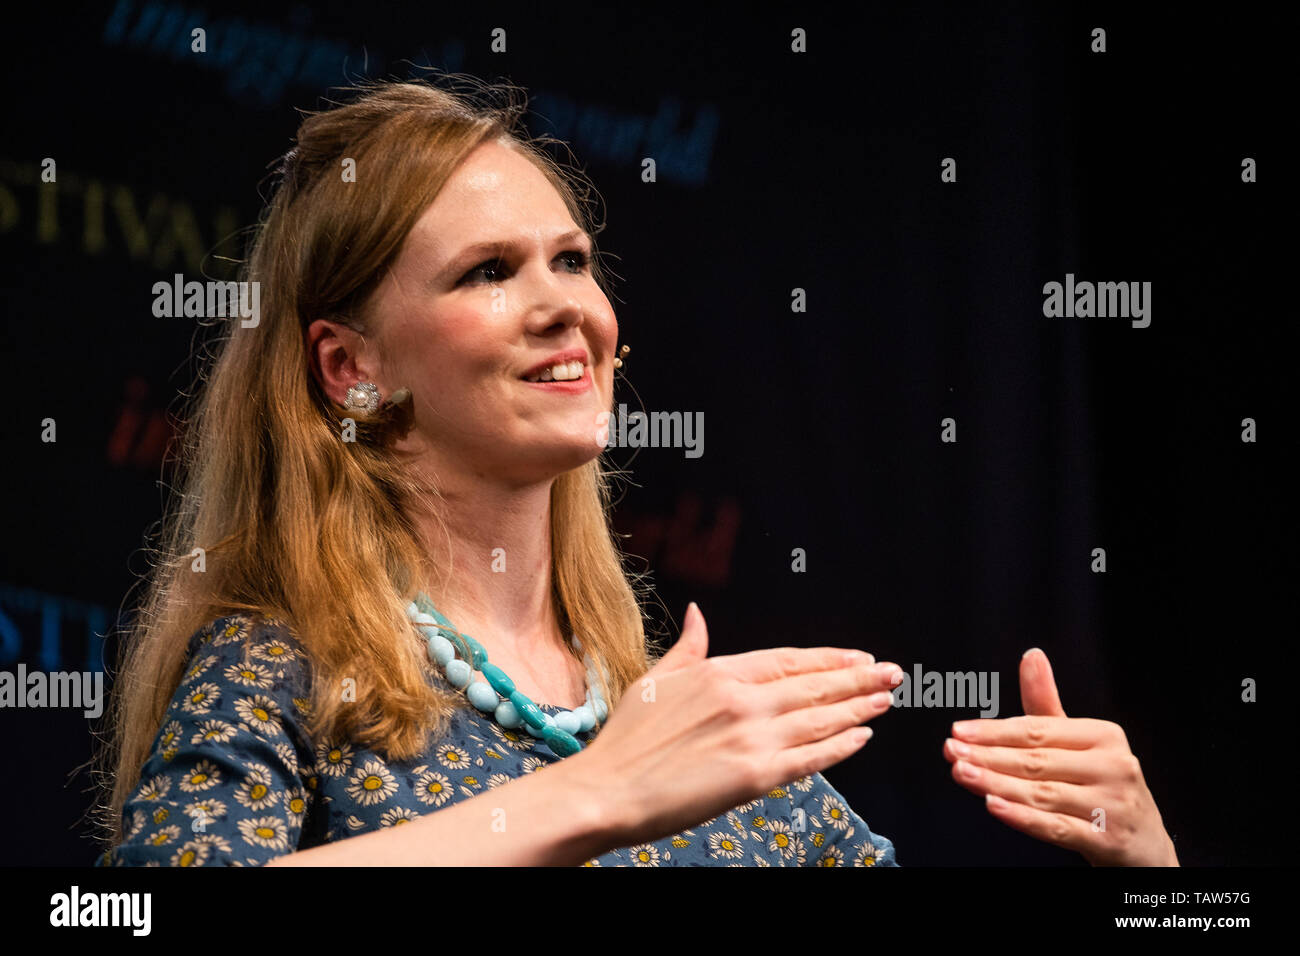 The Hay Festival, Hay on Wye, Wales UK, Tuesday 28th May 2019. Historian DAISY DUNN talking about her fascination with the lives of Pliny The Elder and Younger at the 32nd annual Hay Festival of Literature and the Arts. The festival, held every year in the small town of Hay on Wye on the Wales - England border, attracts the finest writers, politicians and intellectuals from across the globe for 10 days of celebration of the best of the written word and critical debate Photo Credit: keith morris/Alamy Live News Stock Photo